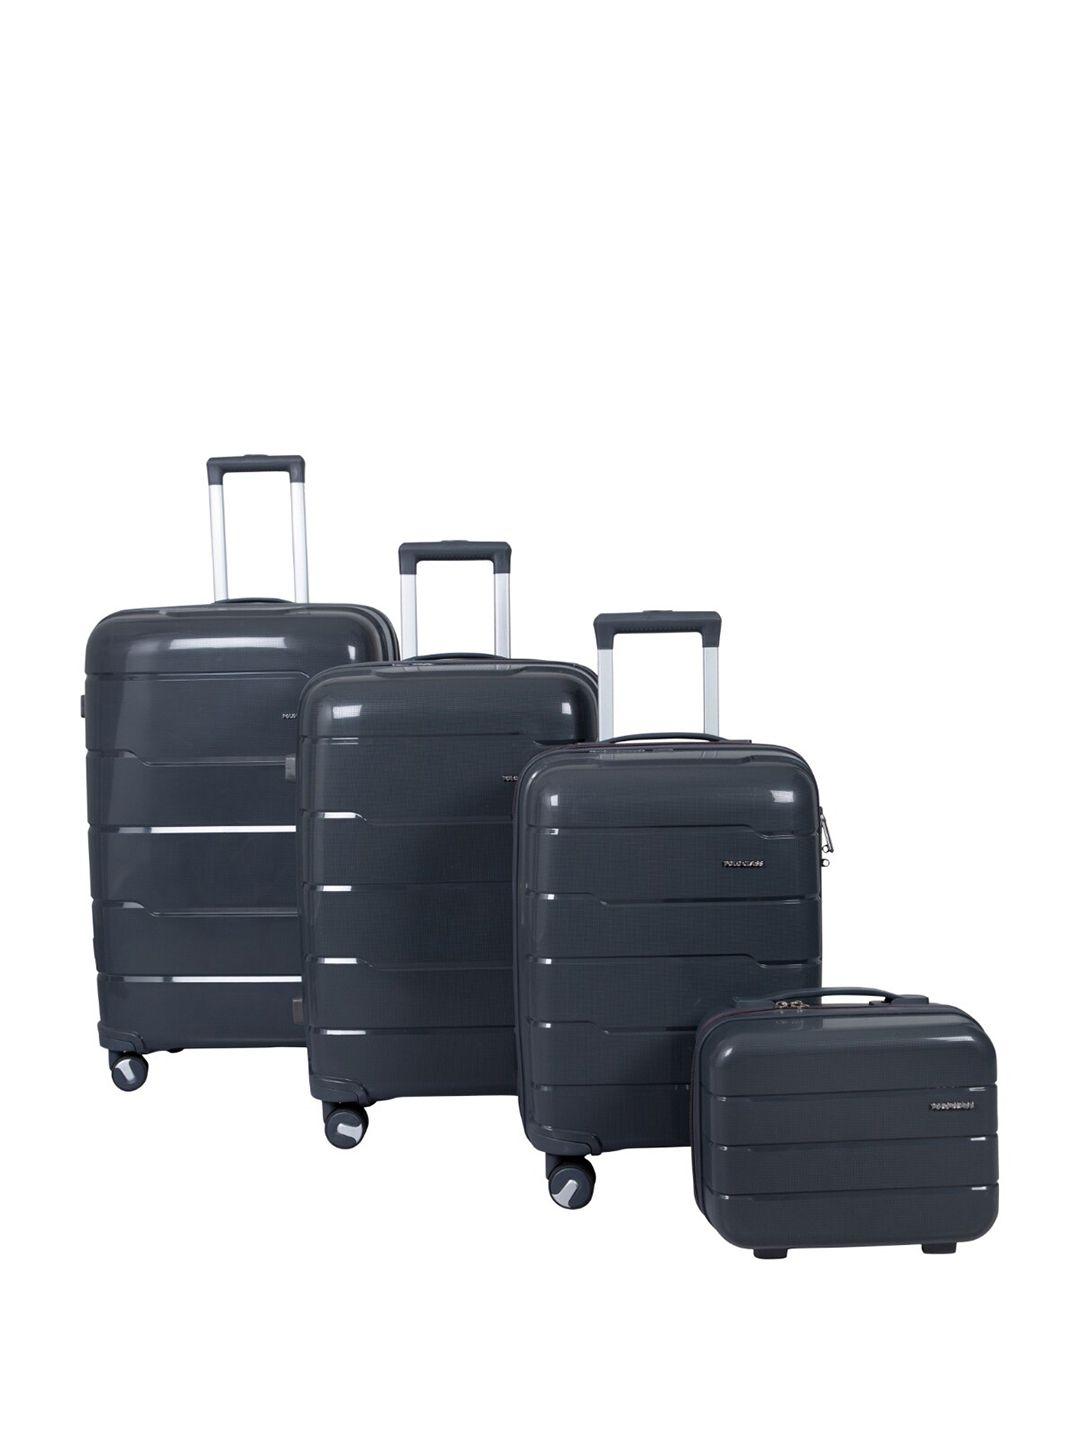 polo class set of 3 textured hard-sided large medium & cabin trolley suitcases